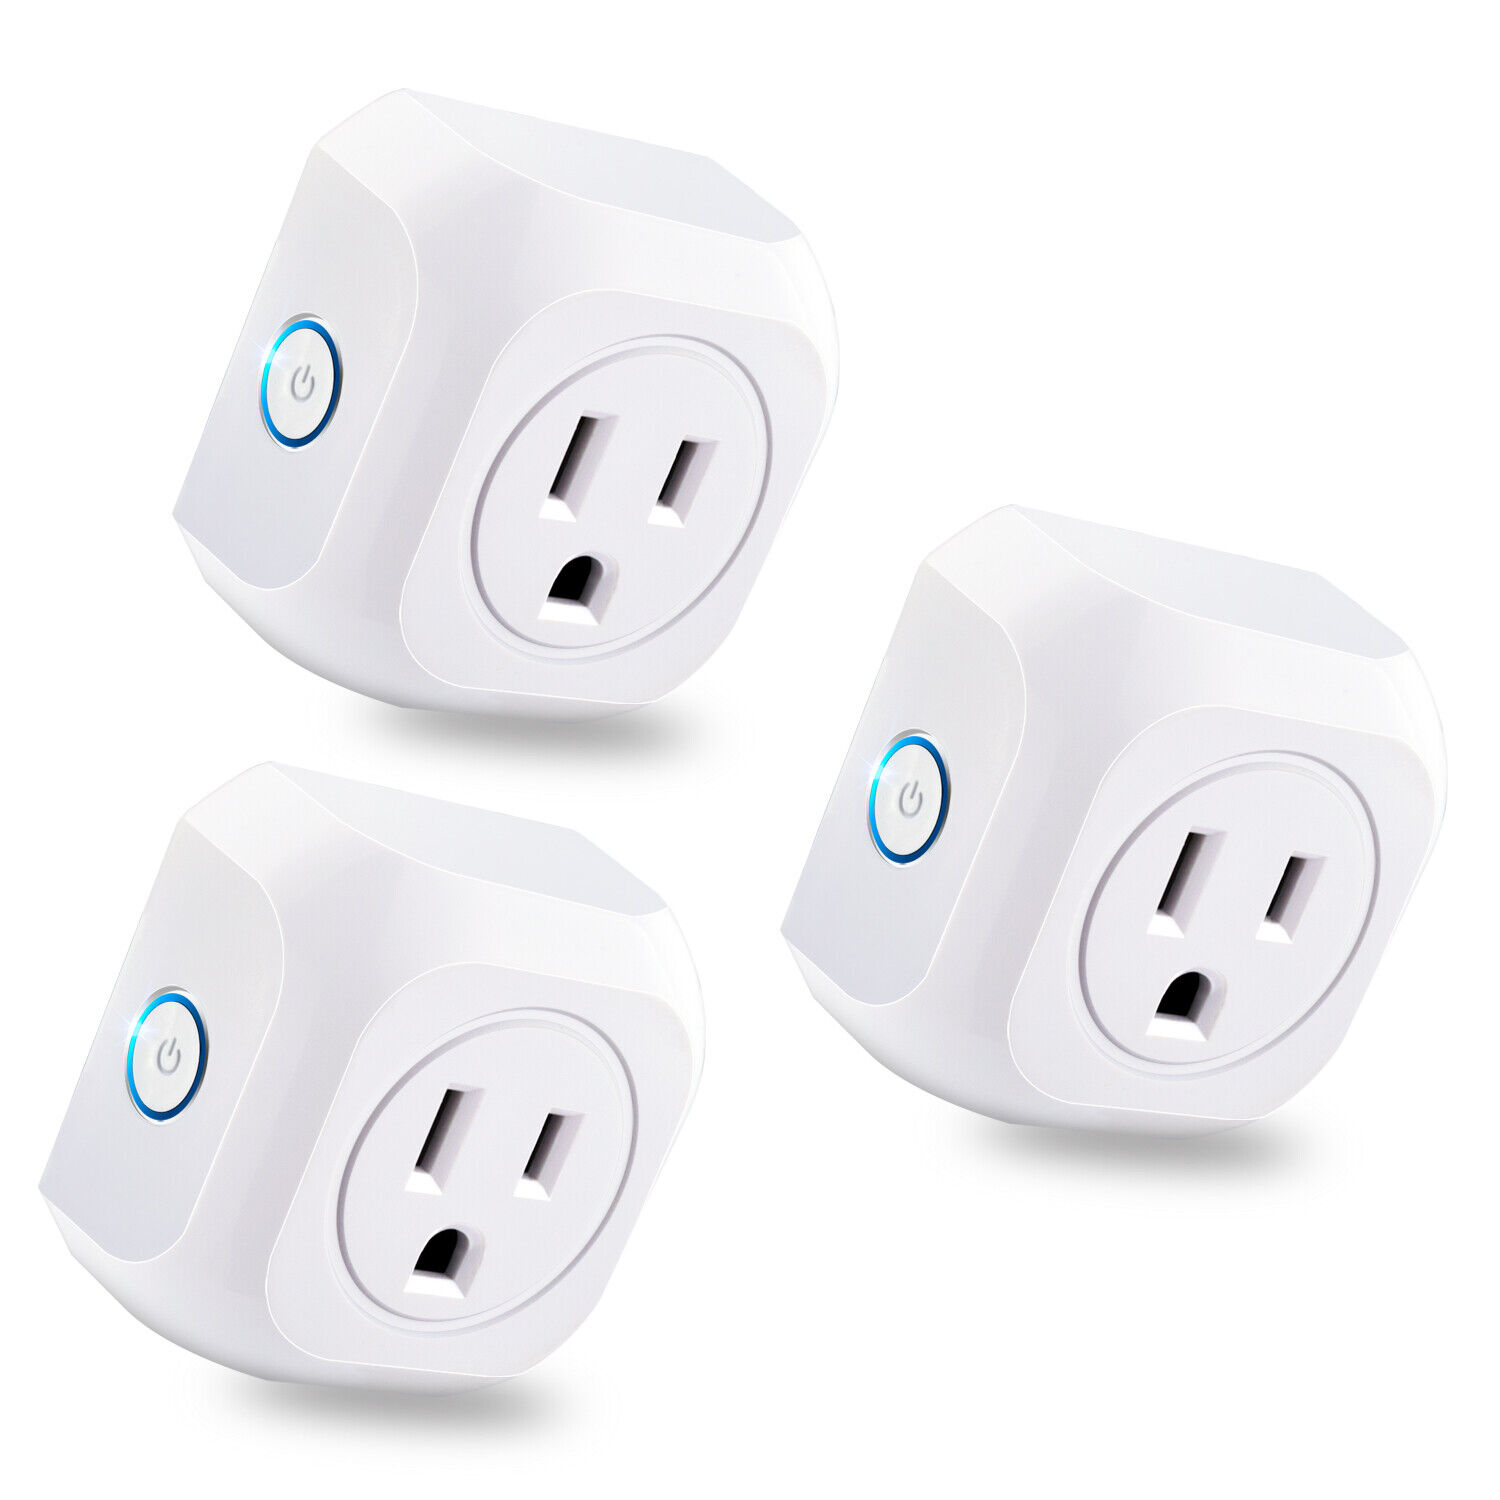 3Pack Smart WiFi Plug Switch Remote Control Timer Power Socket Alexa Google Home Kootion Does not apply - фотография #2